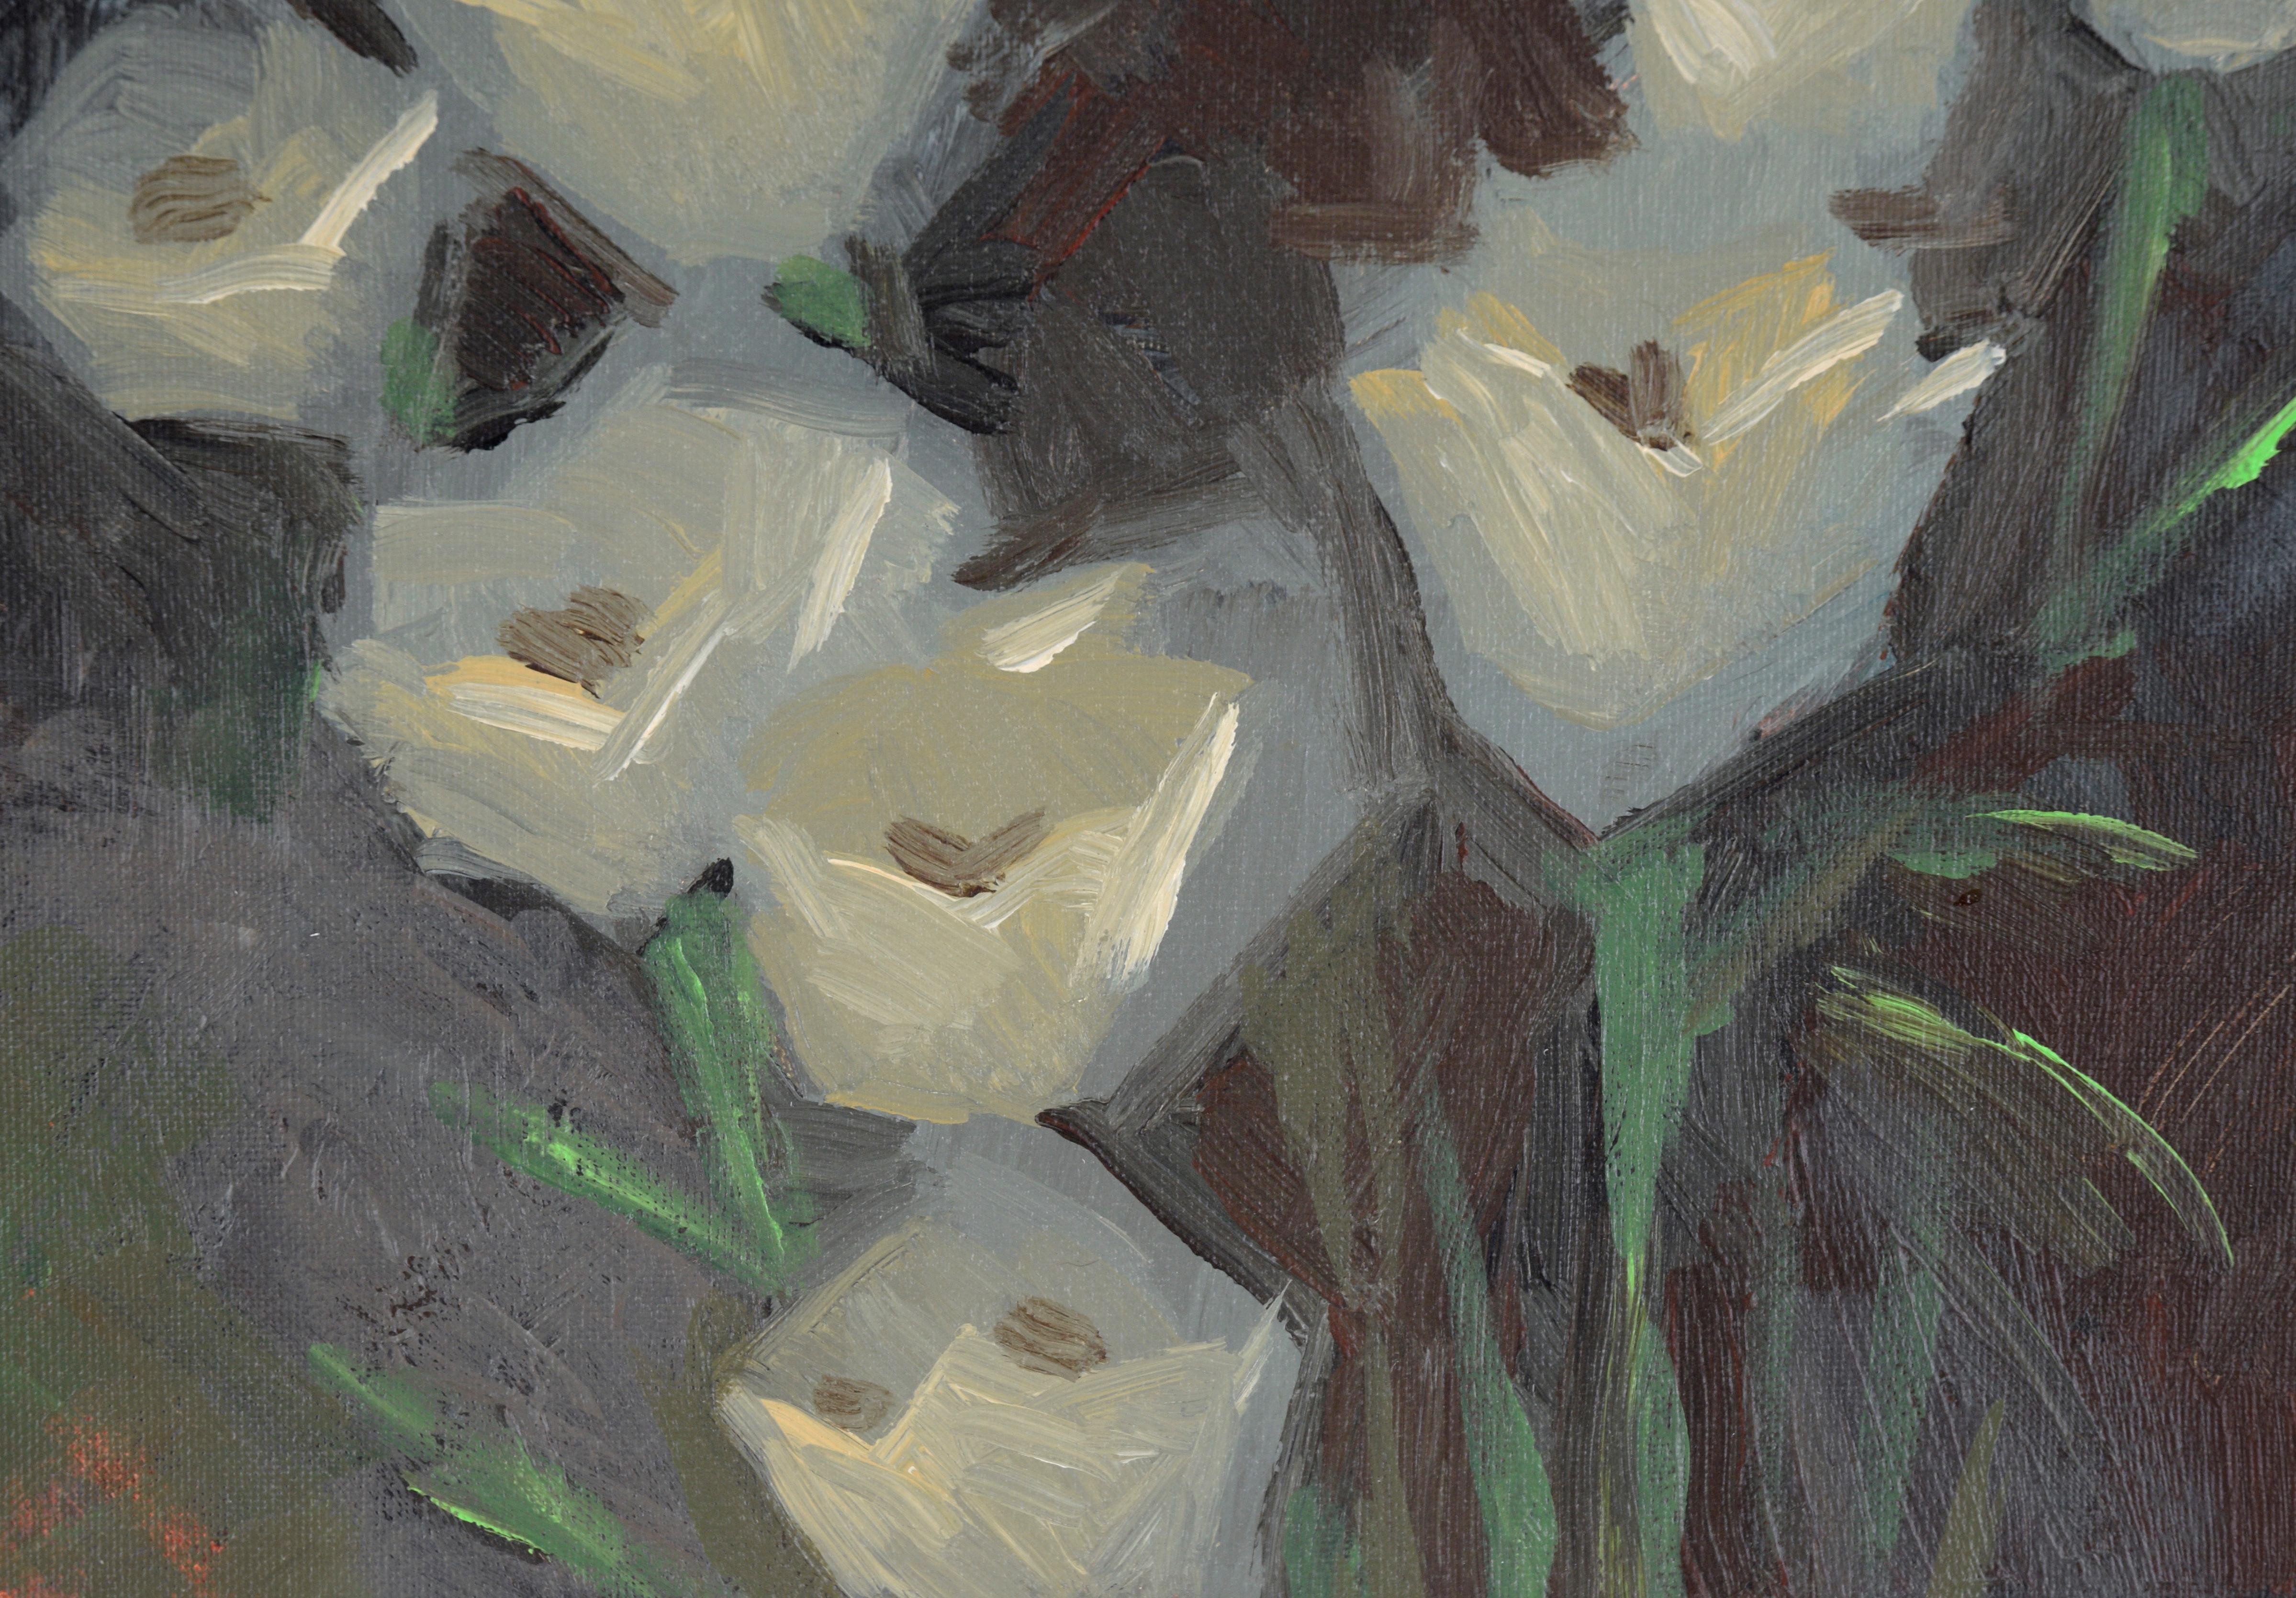 White Tulips at Night in Oil on Canvas

Dramatic floral painting by Rod Norman (American, b. 1947). Several white tulips are shown against a dark background. The flowers are somewhat abstracted, but still have layers of depth and highlights. The